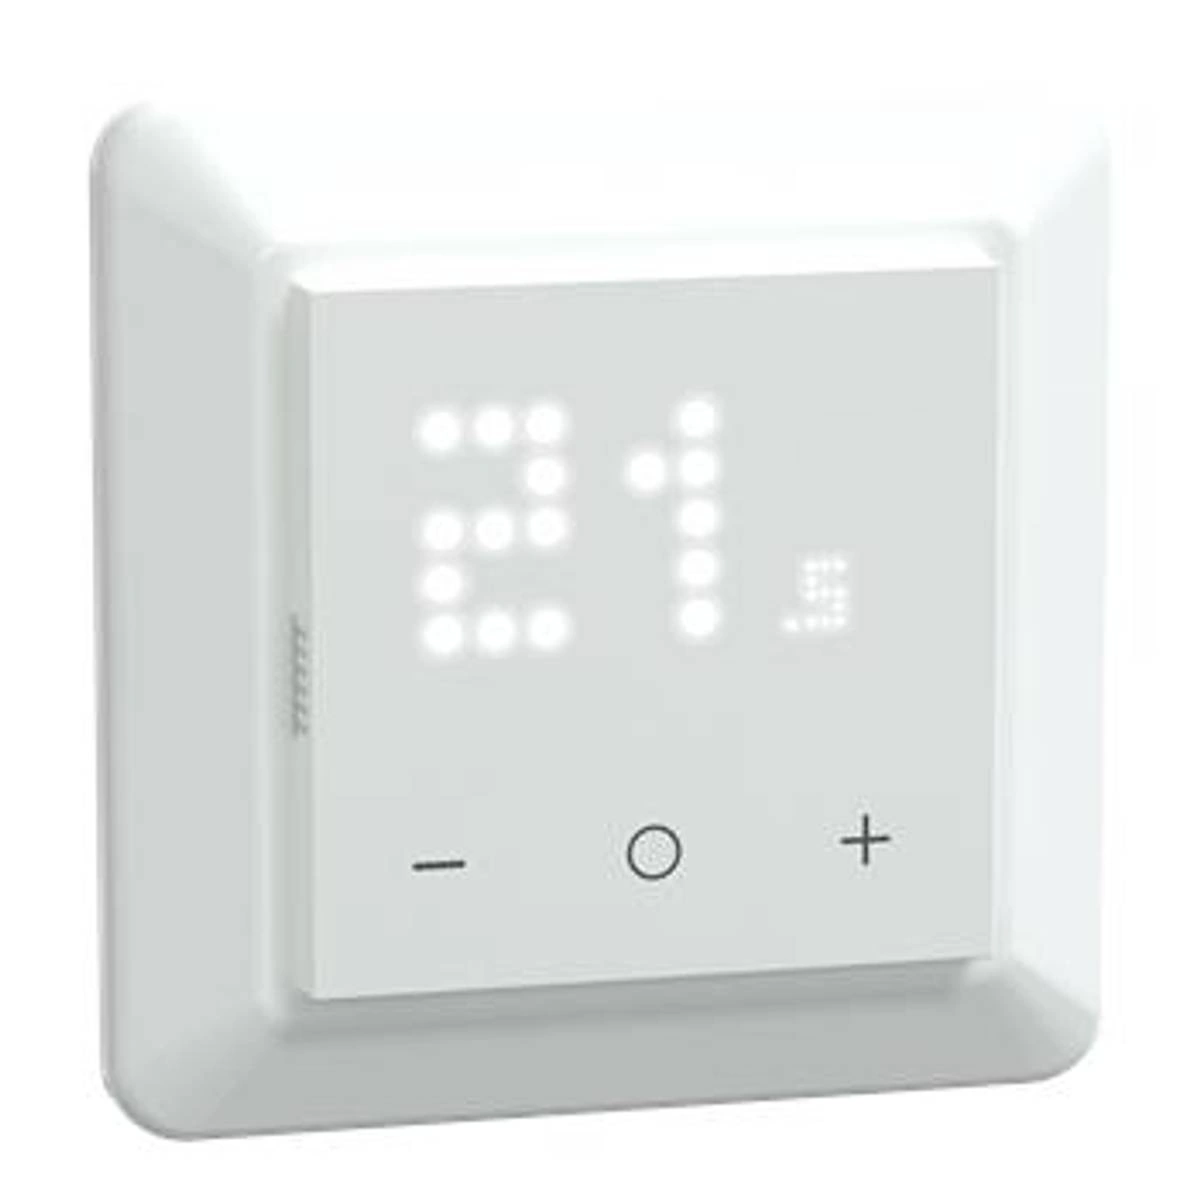 Connected thermostat, Elko Smart, Plus, 16A, black